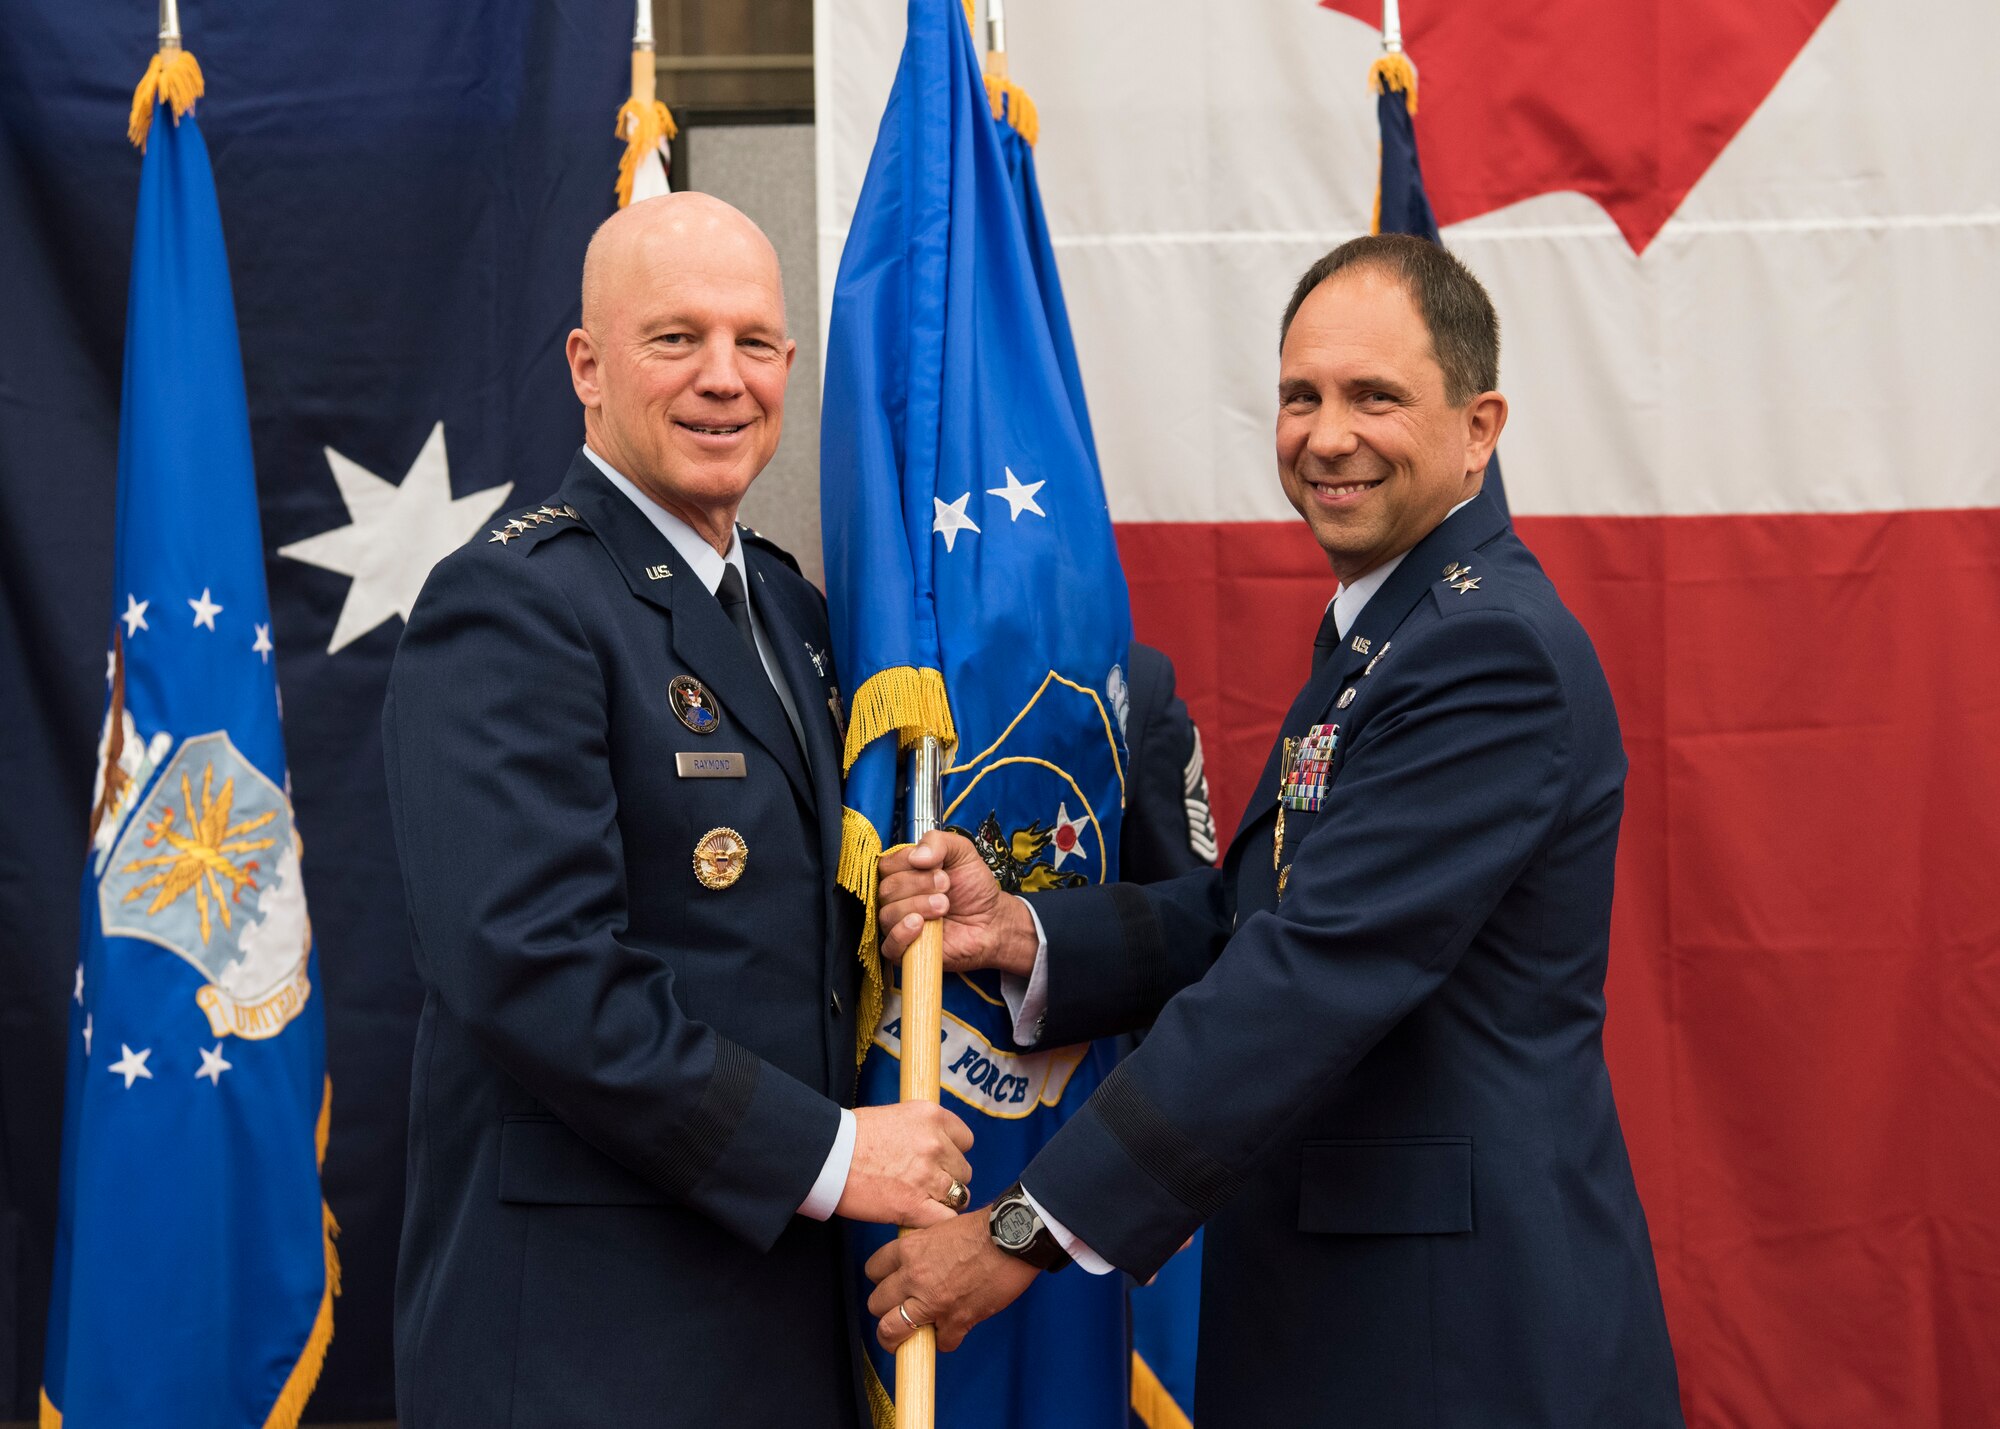 Gen. John W. “Jay” Raymond, U.S. Space Command and Air Force Space Command commander, presents the 14th Air Force guidon to Maj. Gen. John. E. Shaw, Combined Force Space Component Command and 14th AF commander, during a change of commander ceremony Nov. 20, 2019, at Vandenberg Air Force Base, Calif. As the Air Force's sole numbered Air Force for space, 14th AF is responsible for the organization, training, equipping, command and control and employment of Air Force space forces to support operational plans and missions for U.S. combatant commanders and air component commanders. (U.S. Air Force photo by Airman 1st Class Aubree Milks)